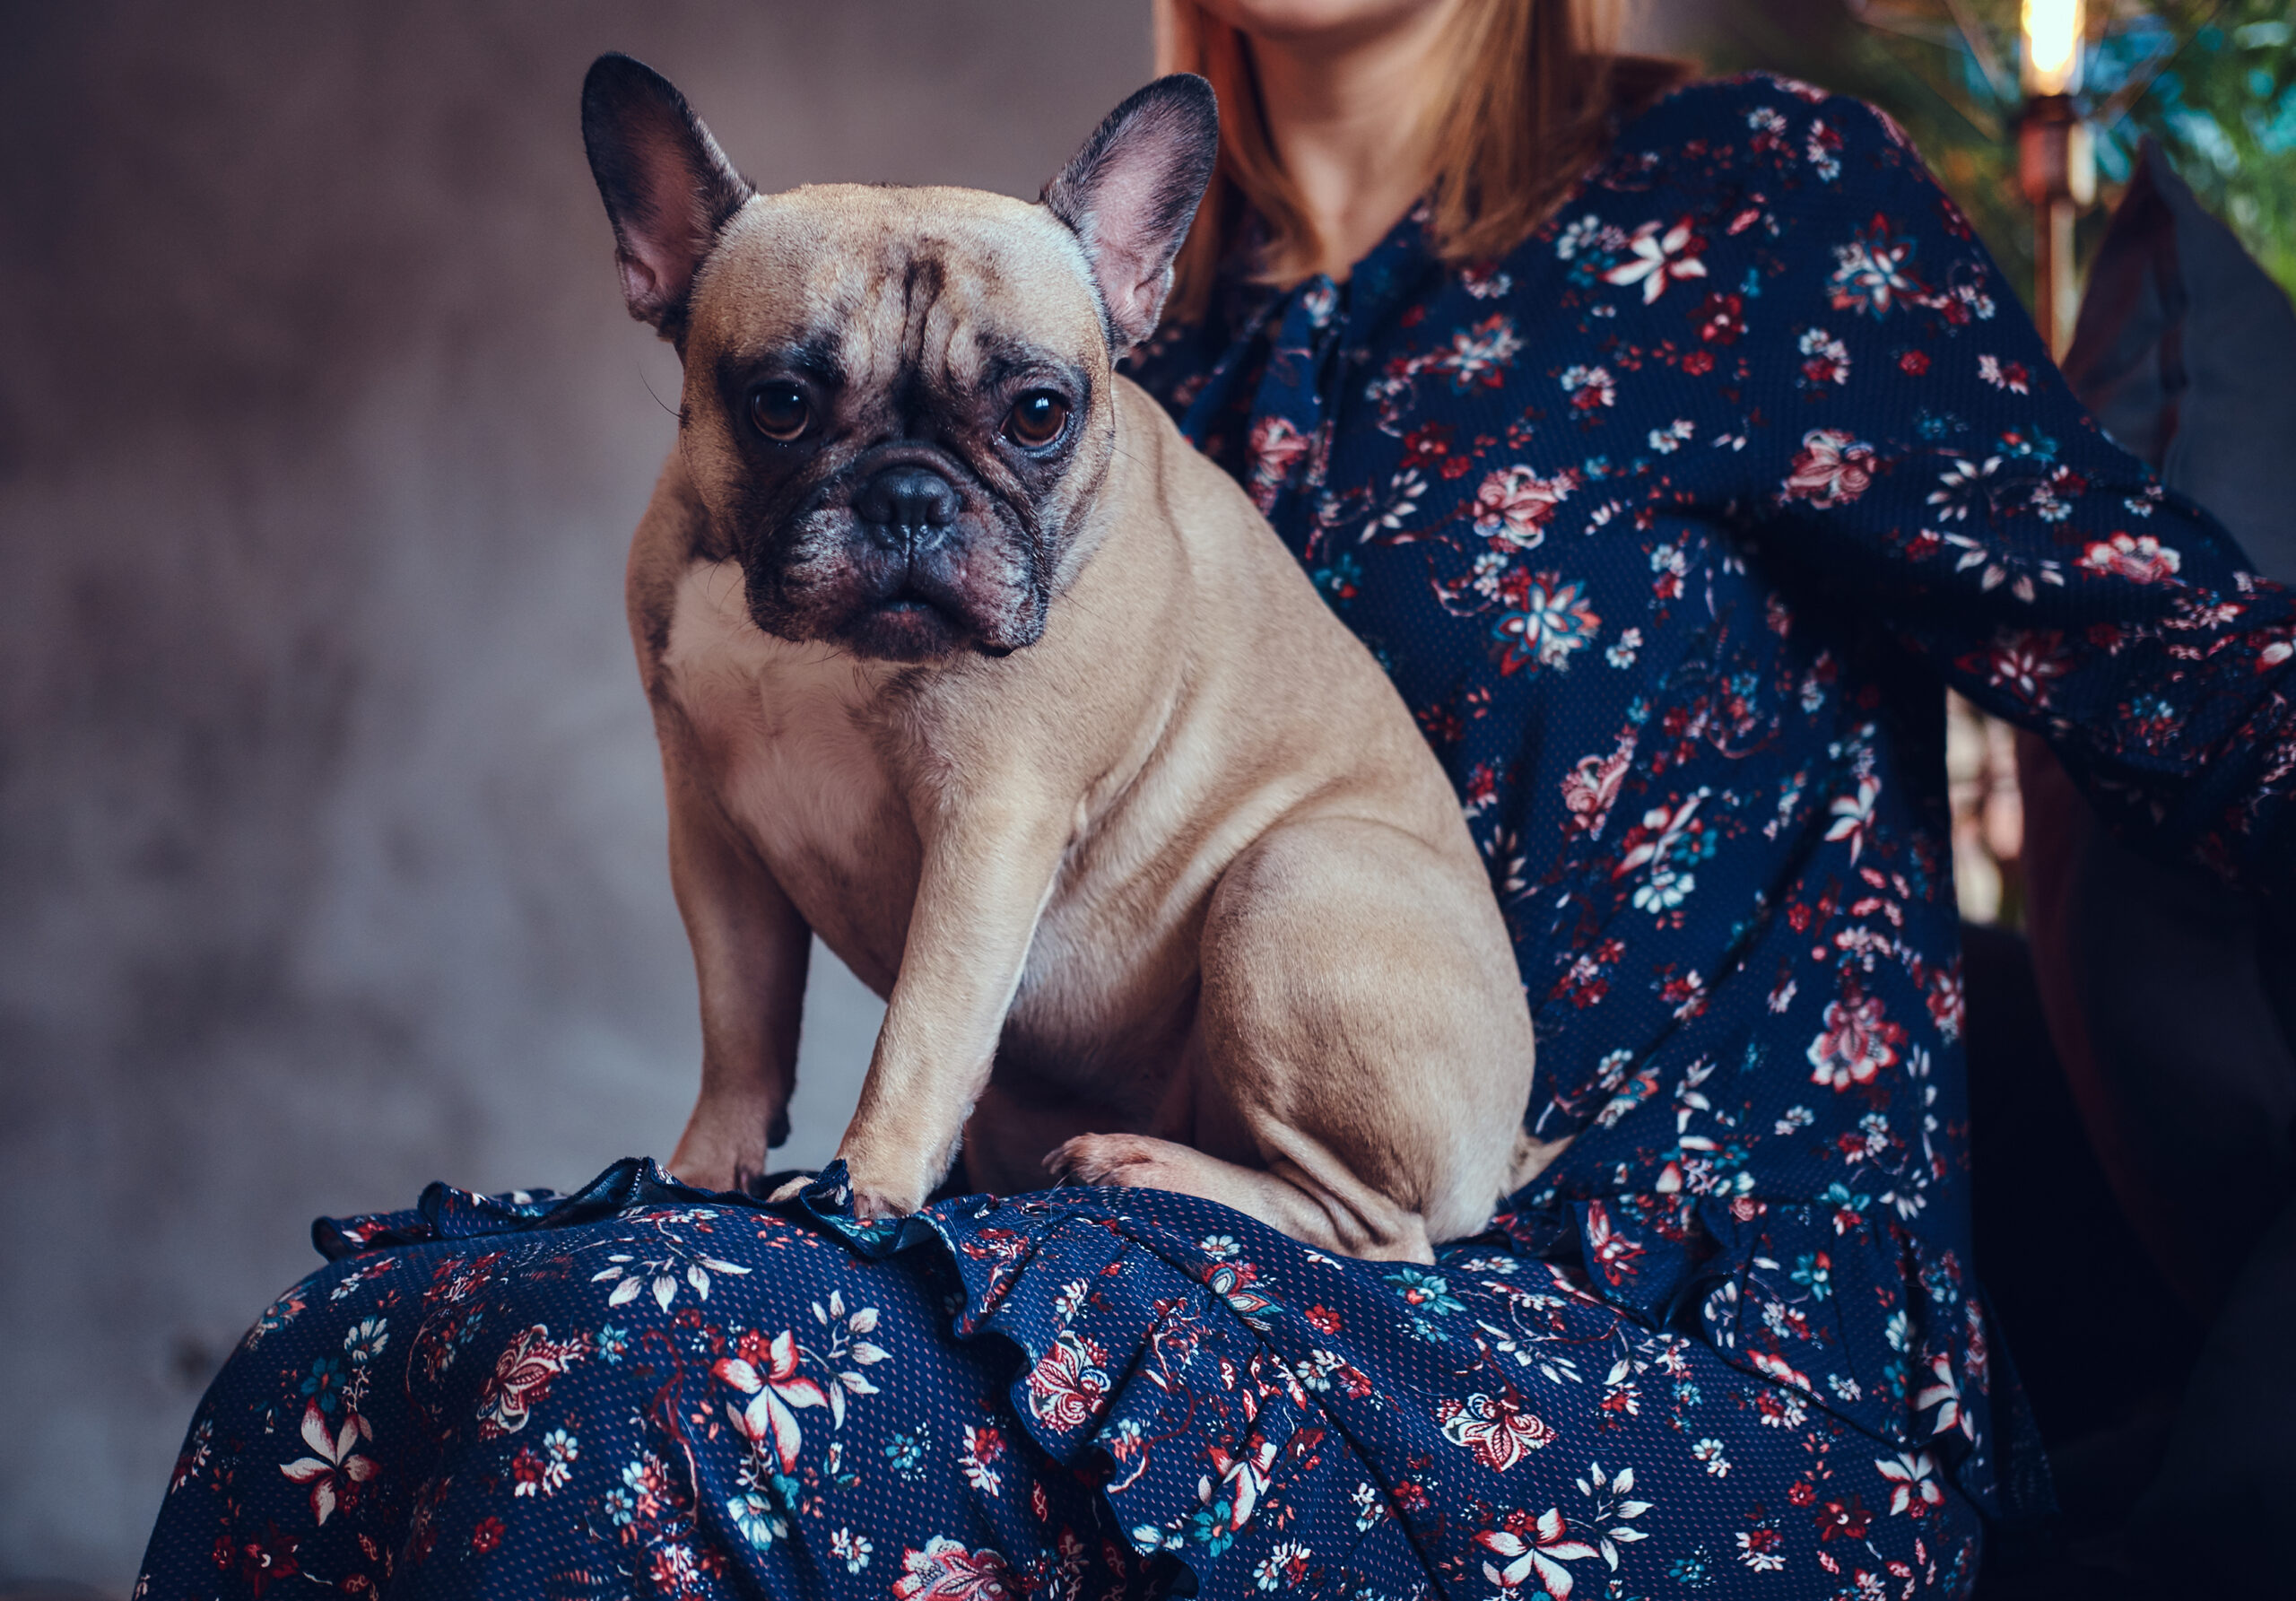 Happy woman sitting with a cute pug in a room with loft interior